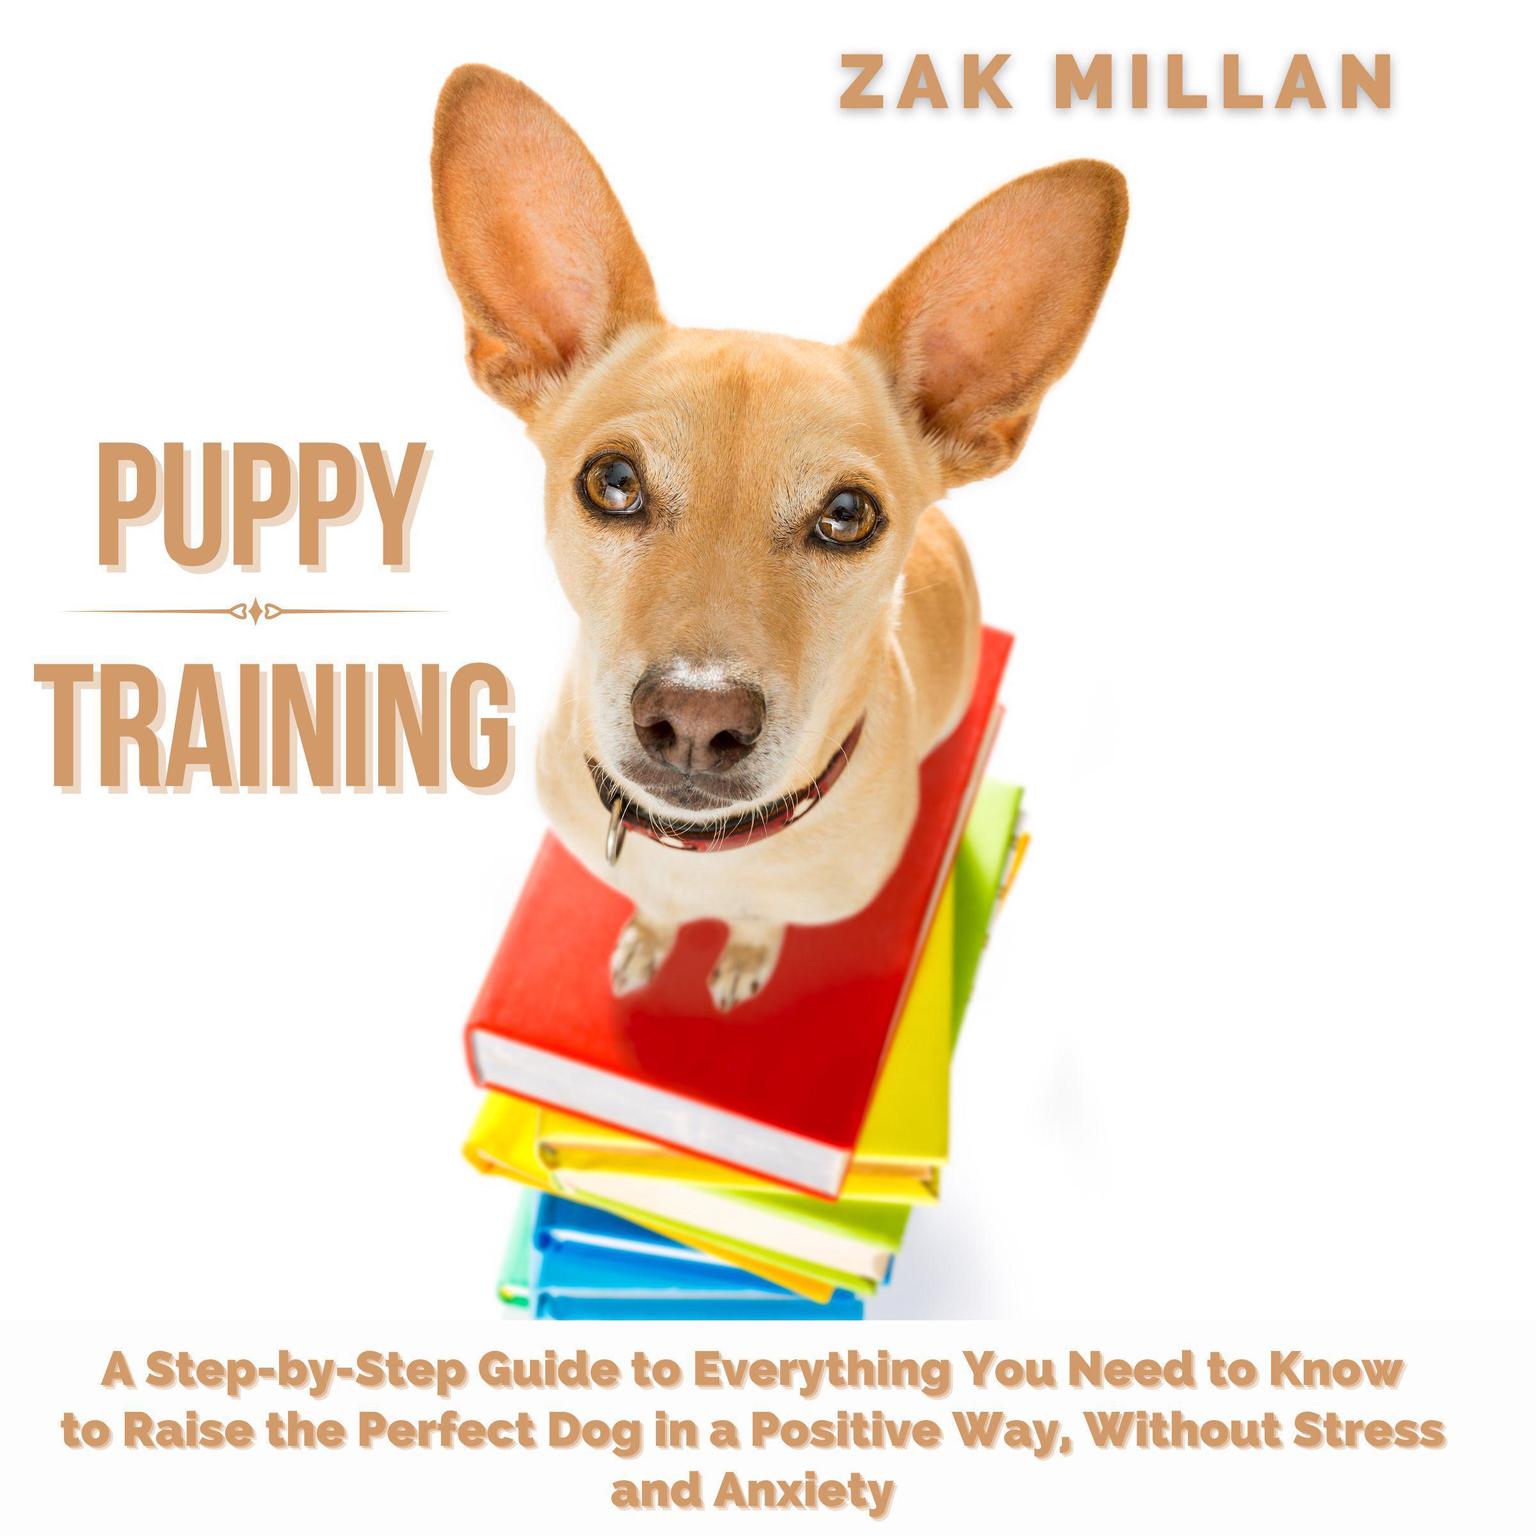 Puppy Training: A Step-by-Step Guide to Everything You Need to Know to Raise the Perfect Dog in a Positive Way, Without Stress and Anxiety Audiobook, by Zak Millan